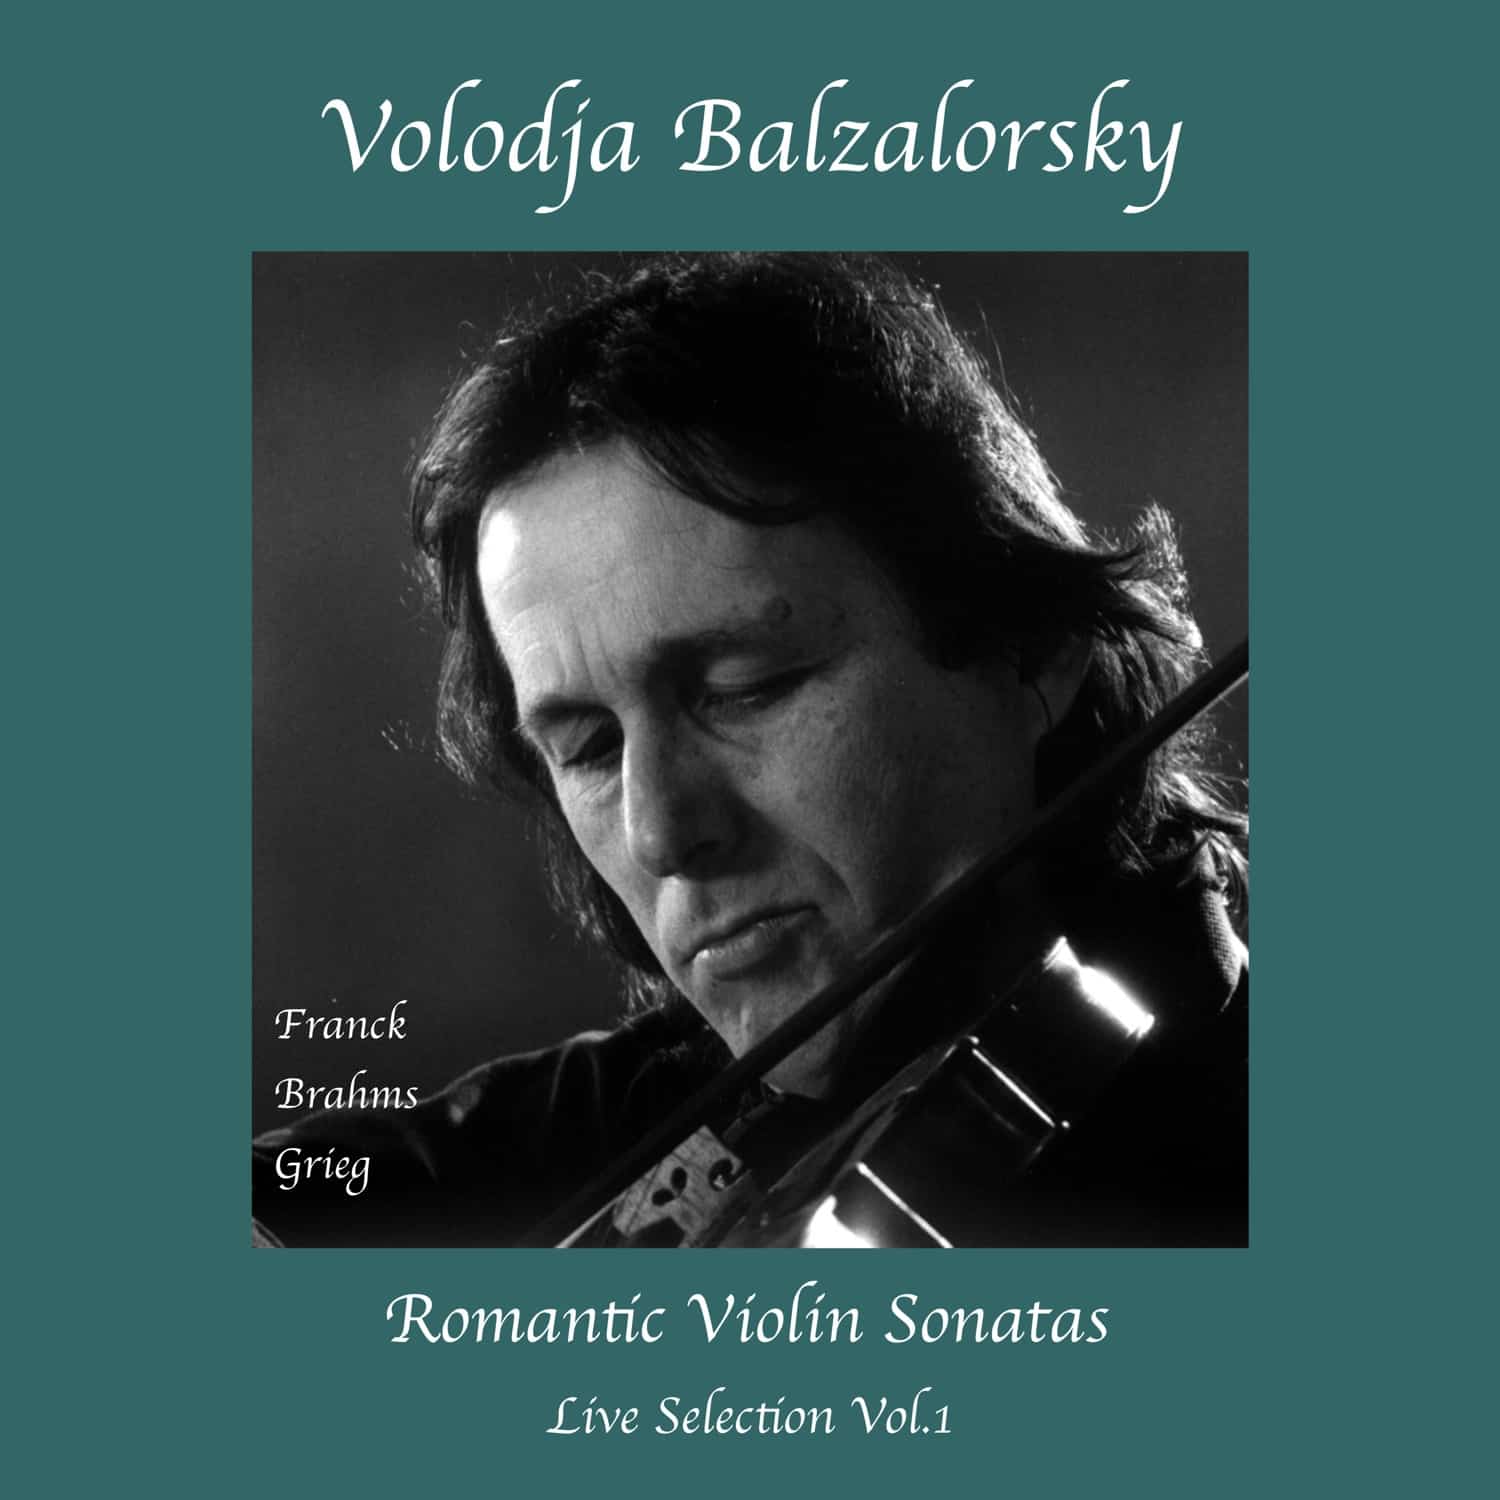 FOUR NOMINATIONS FOR VOLODJA BALZALORSKY AT 13th INDEPENDENT MUSIC AWARDS – IMA’s